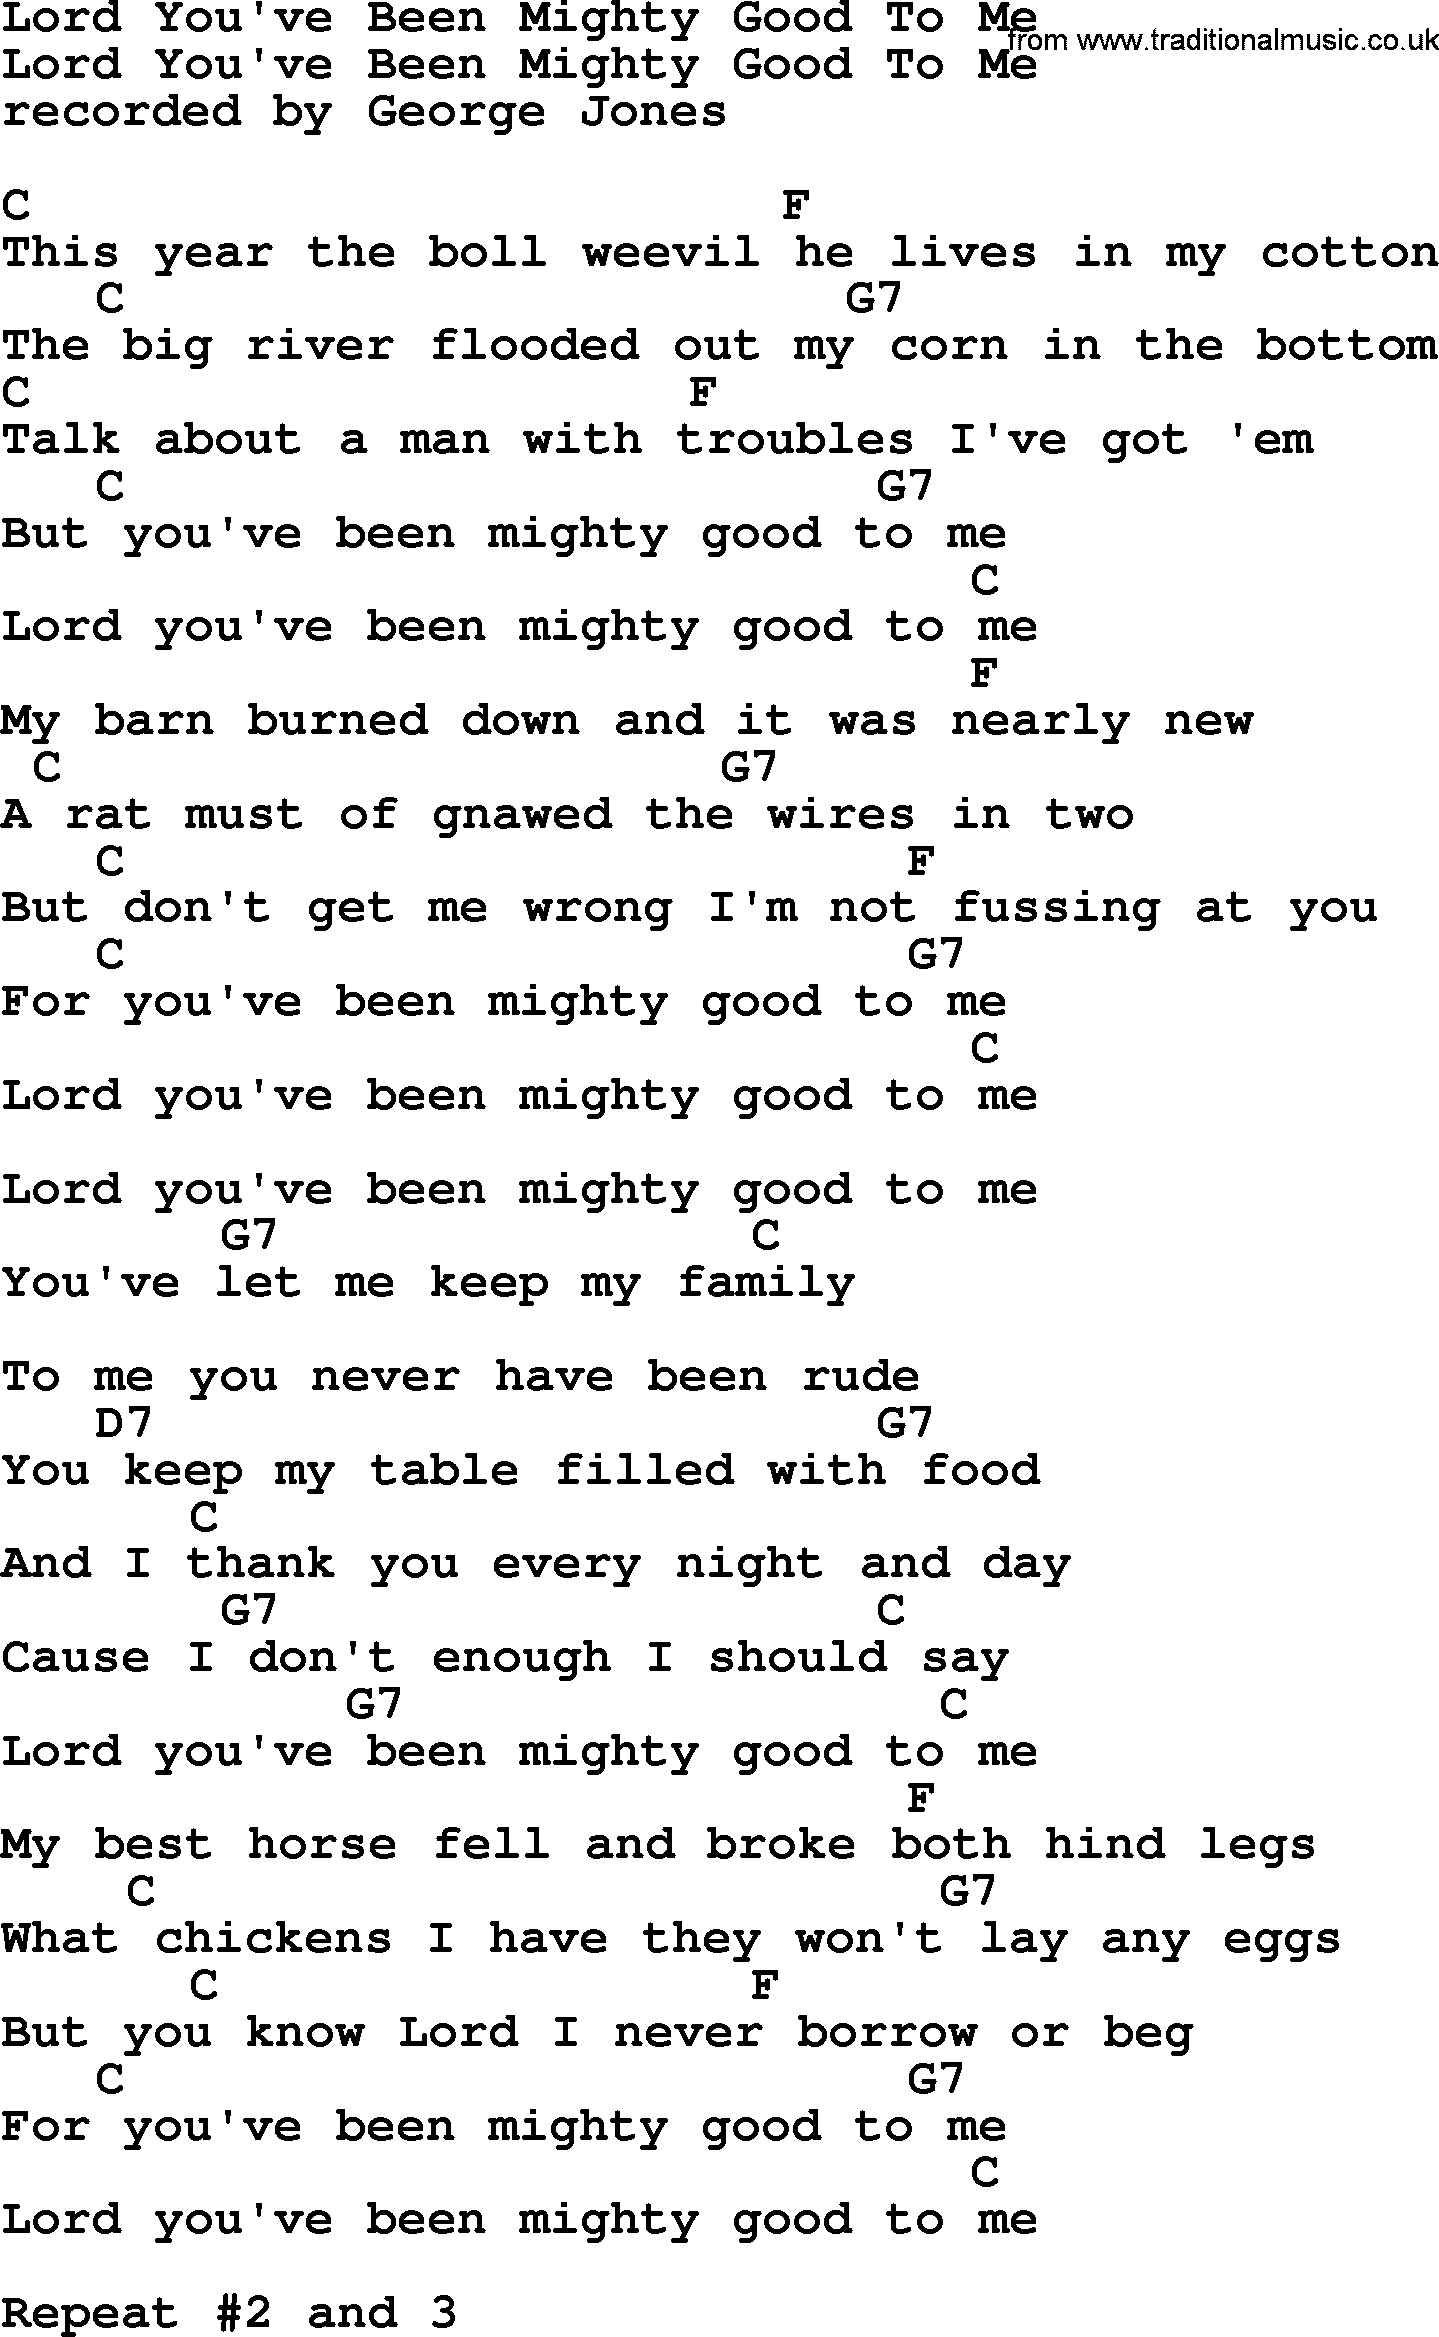 George Jones song: Lord You've Been Mighty Good To Me, lyrics and chords